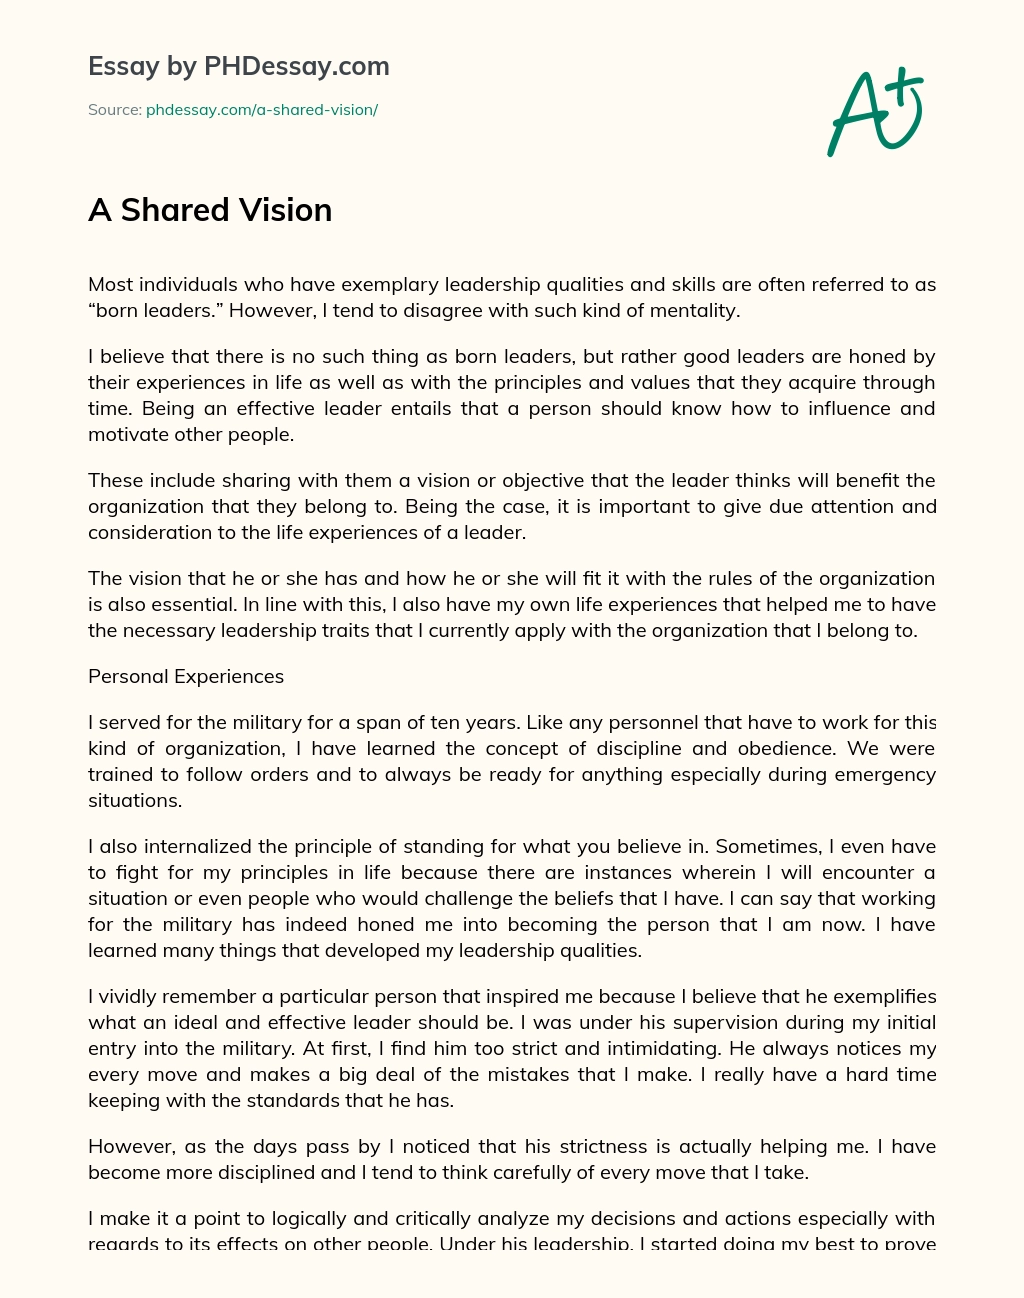 A Shared Vision essay